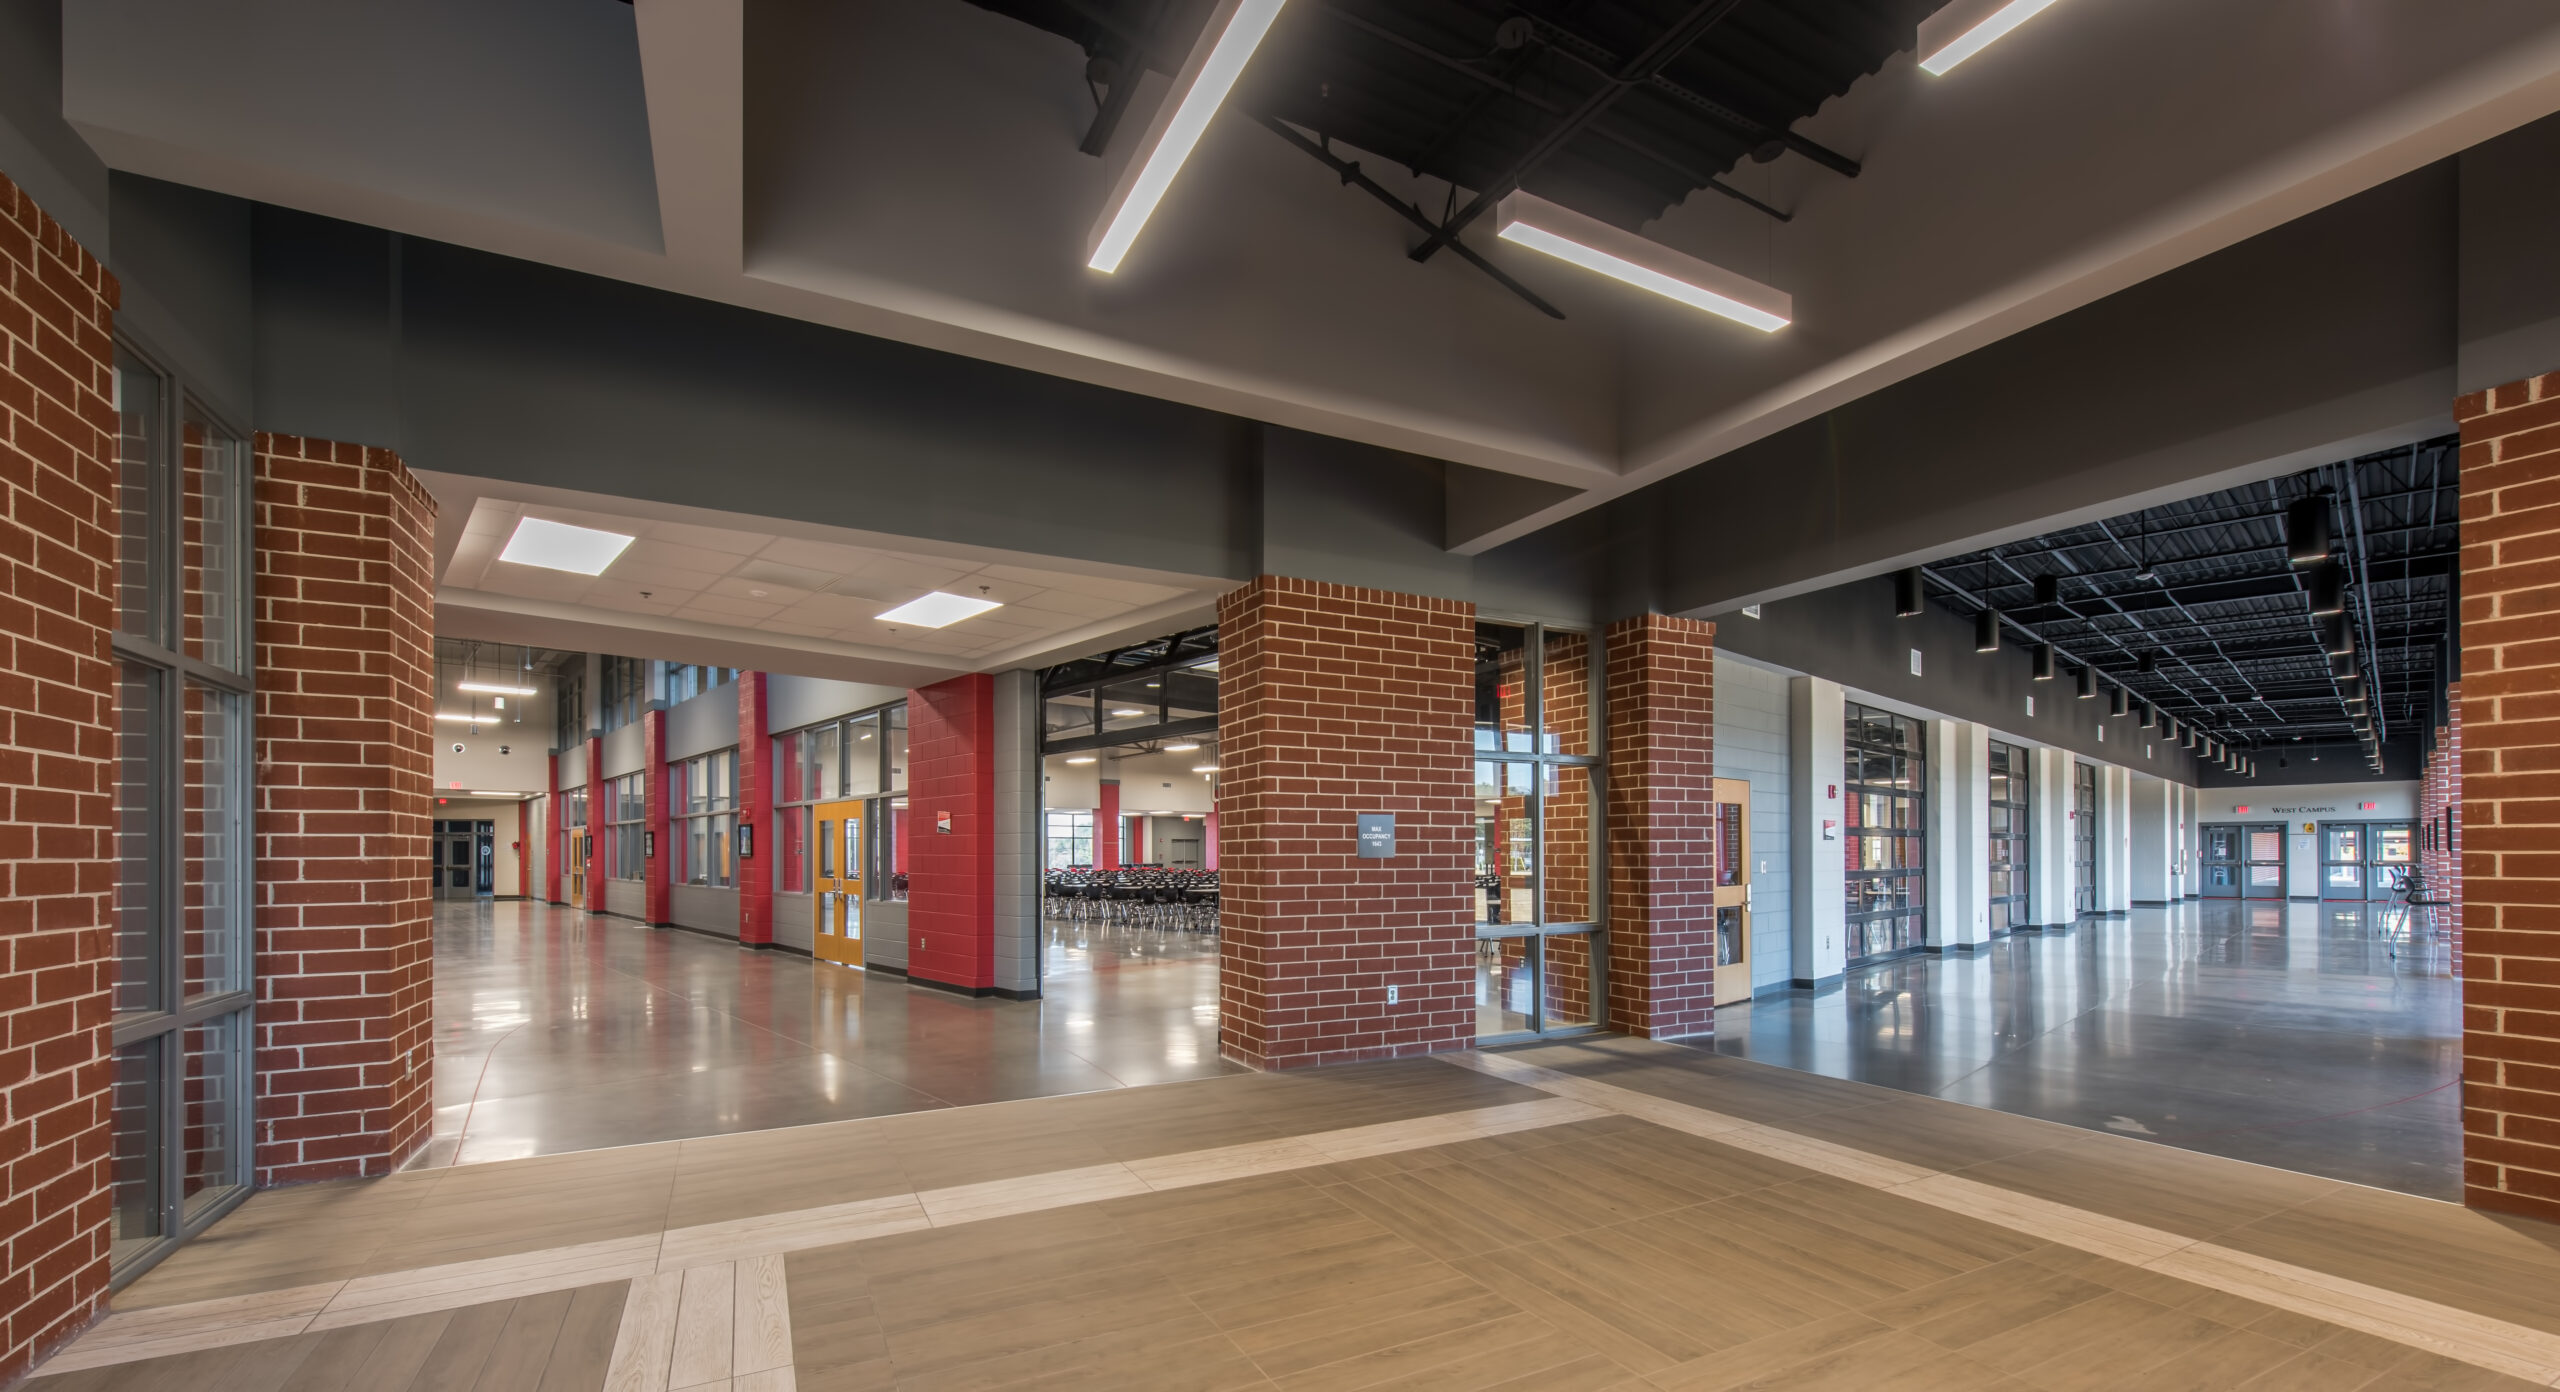 High school hallway with brick walls and red accents with view into classroom